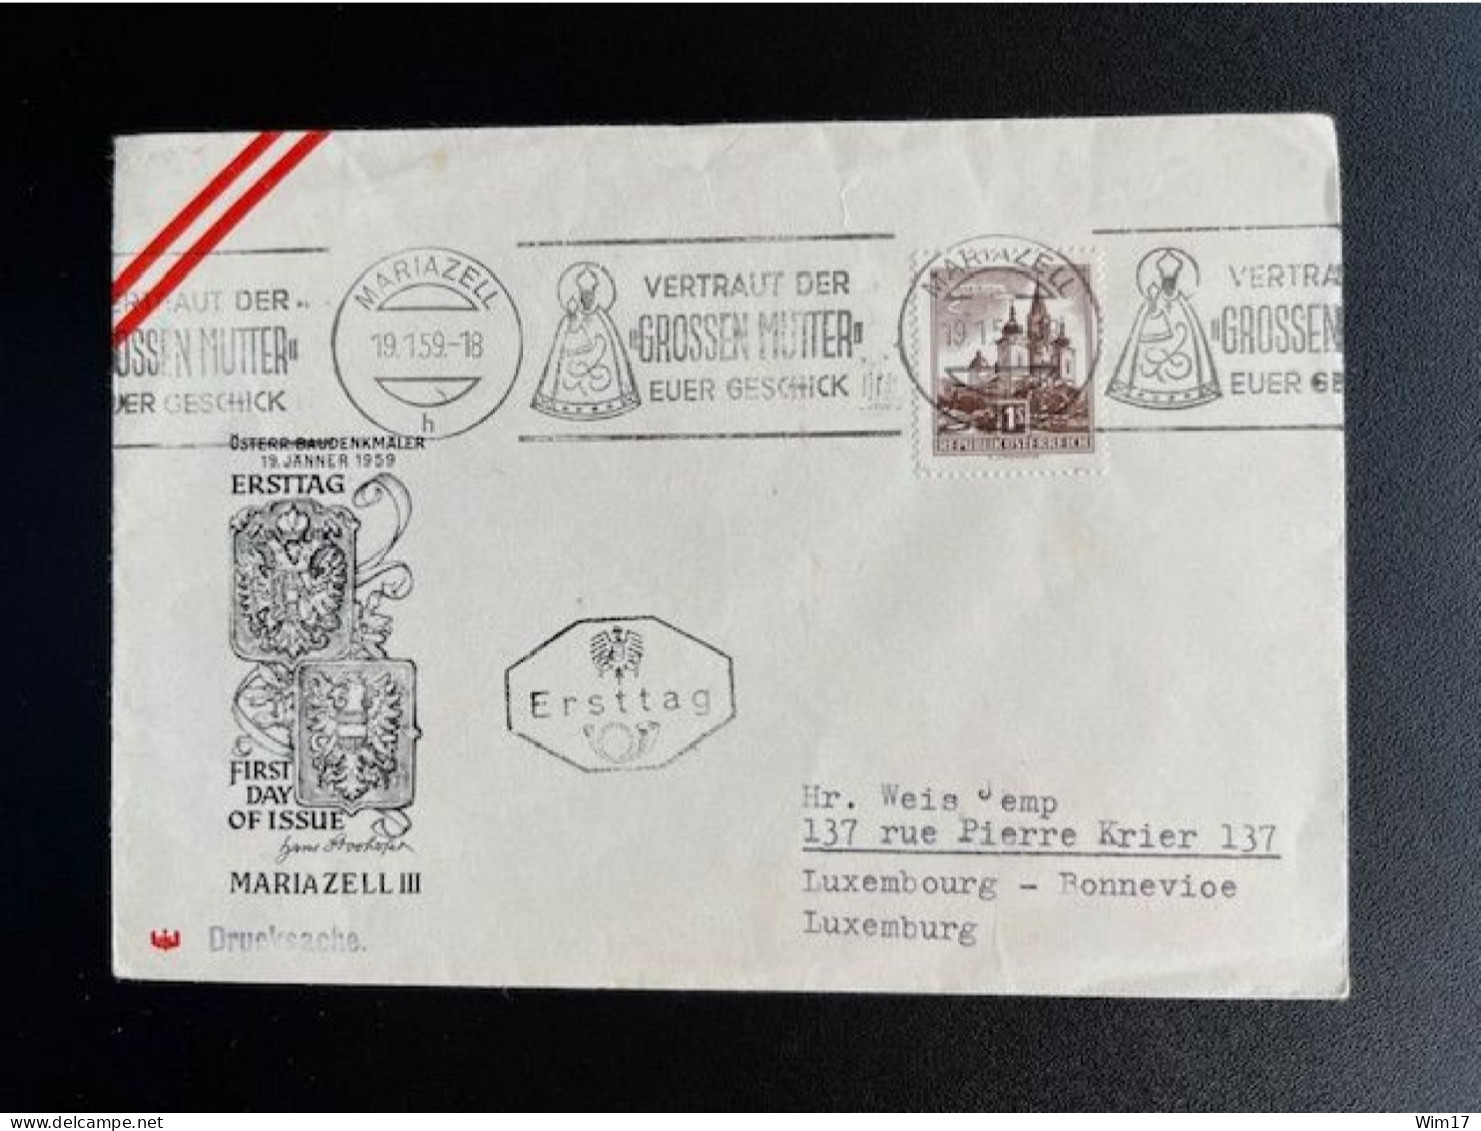 AUSTRIA 1959 LETTER MARIAZELL TO LUXEMBOURG 19-01-1959 OOSTENRIJK OSTERREICH FDC - Covers & Documents